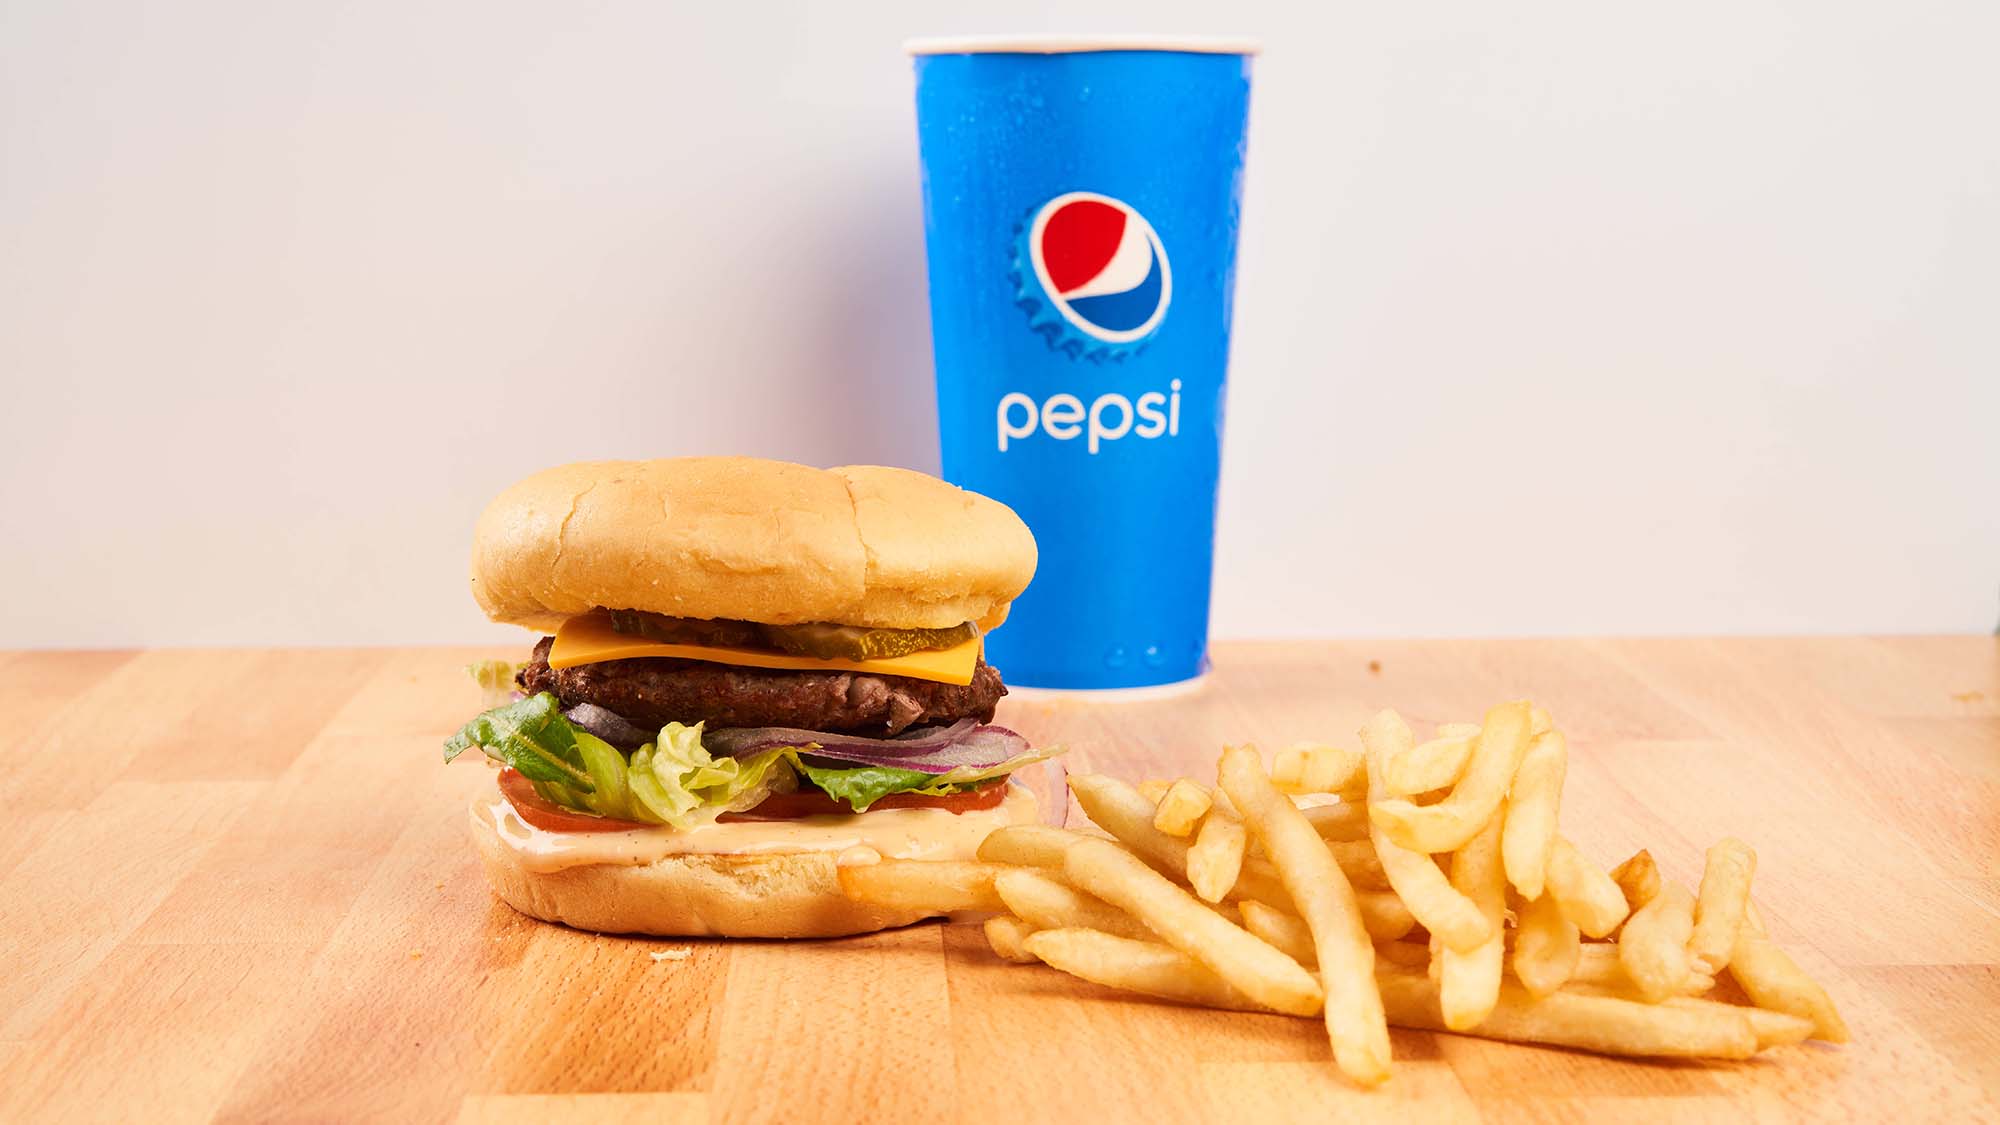 Buger, fries and Pepsi cup photographed on wood table